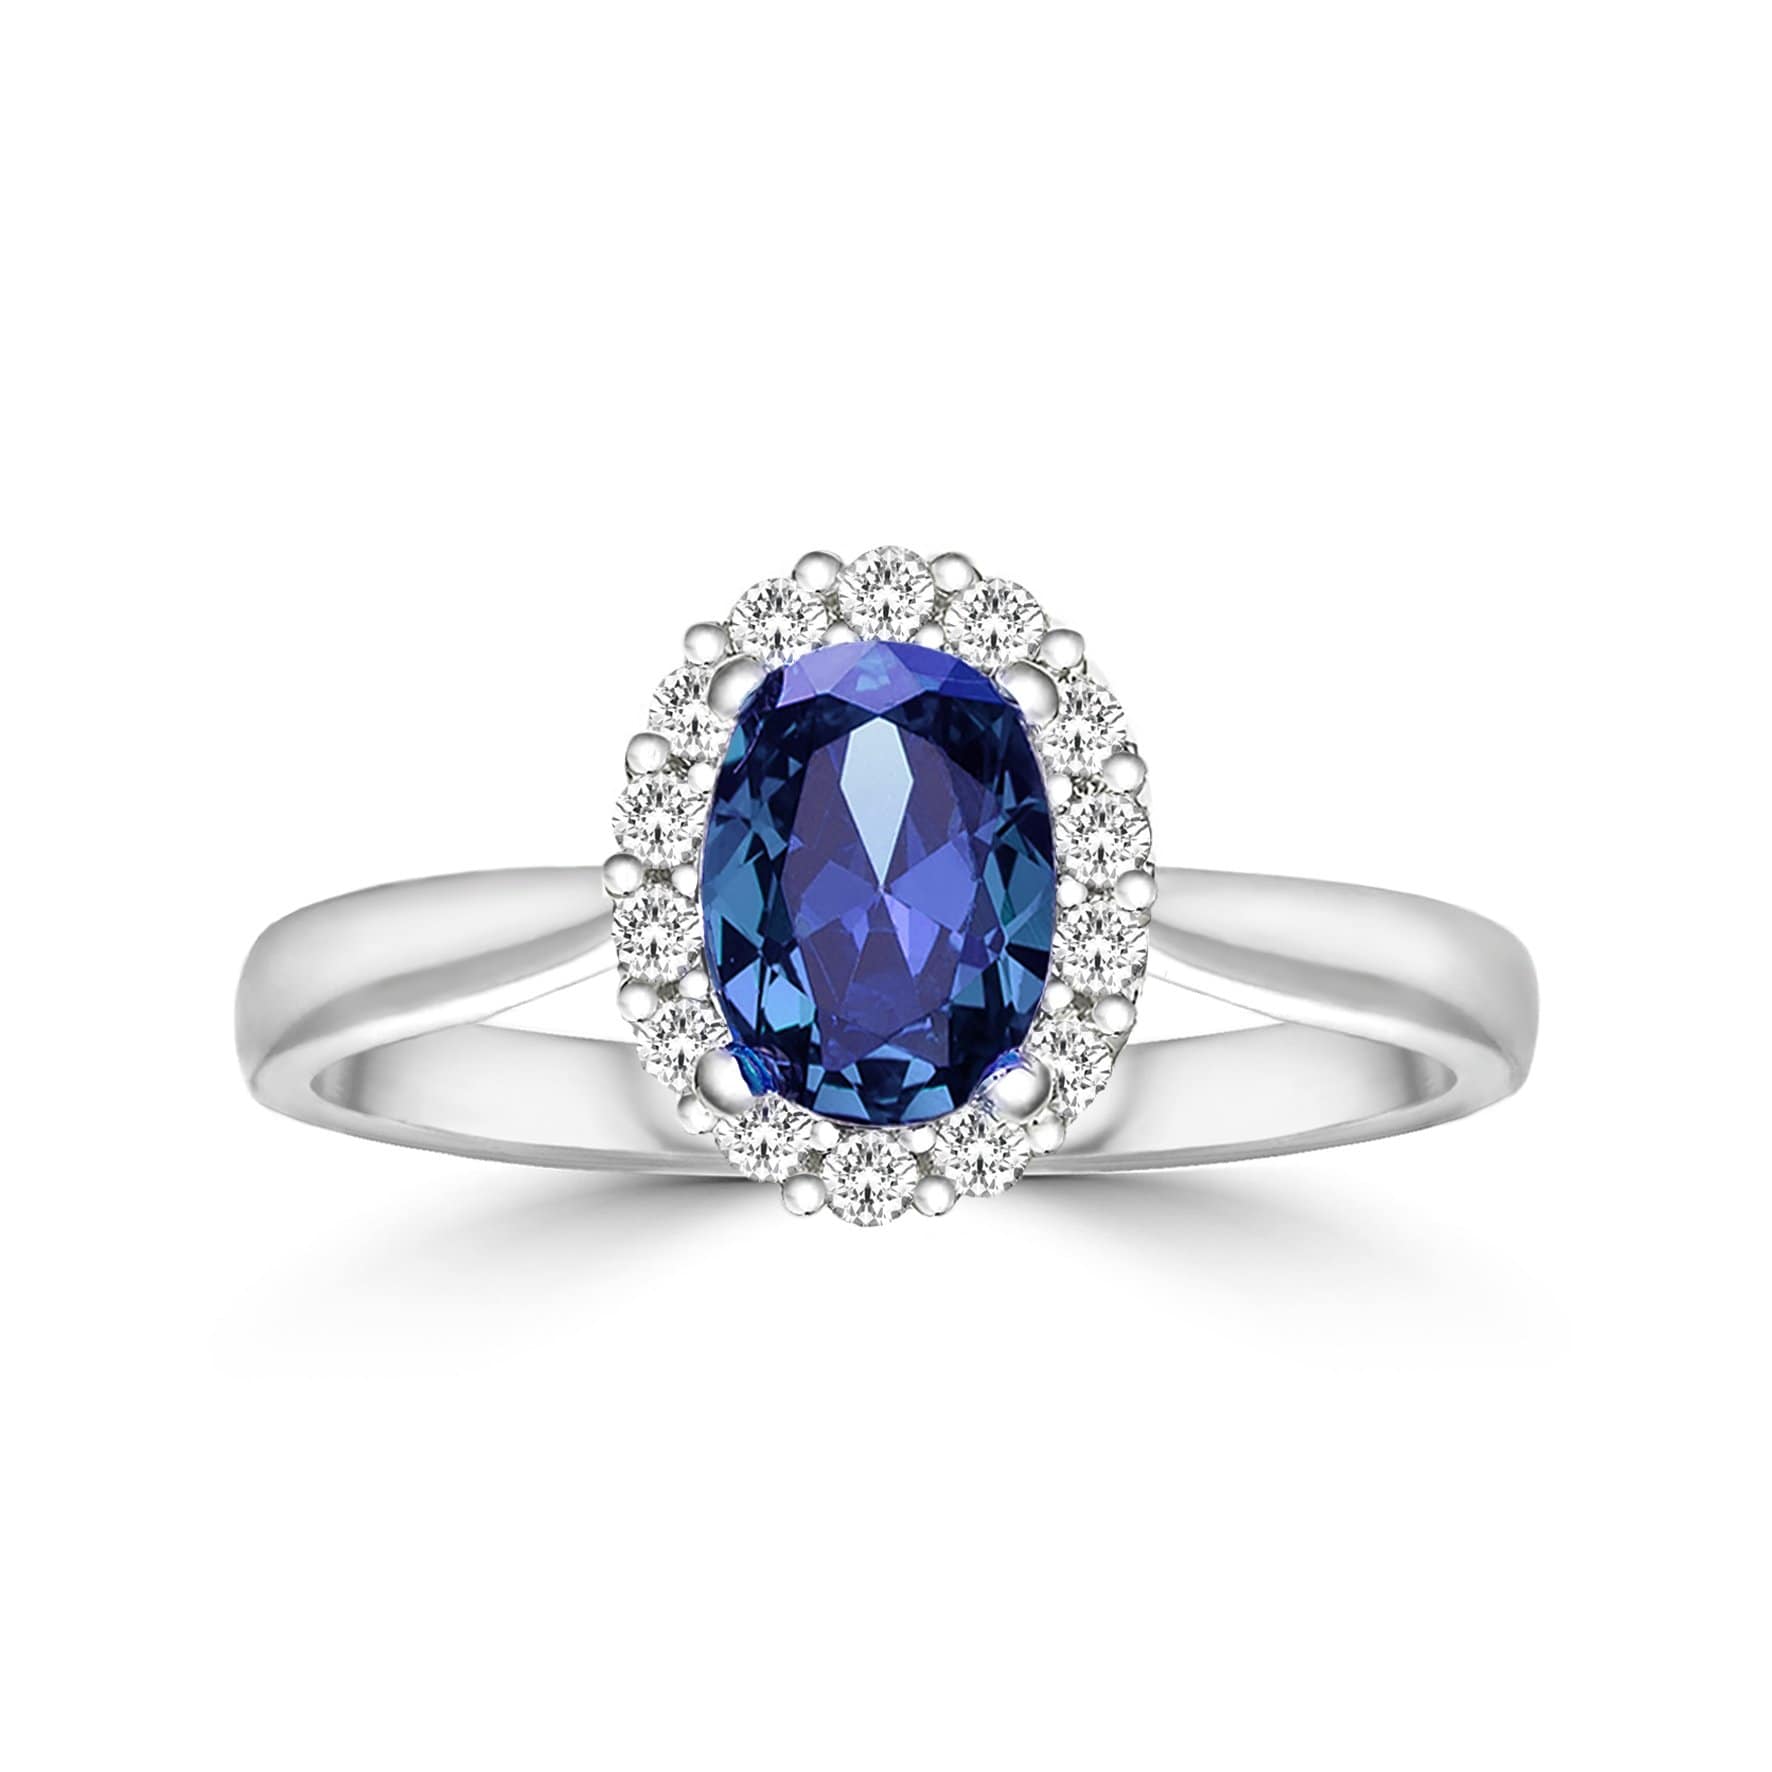 Lynora Jewellery Ring Opulence Halo Ring Sterling Silver & Sapphire Stone